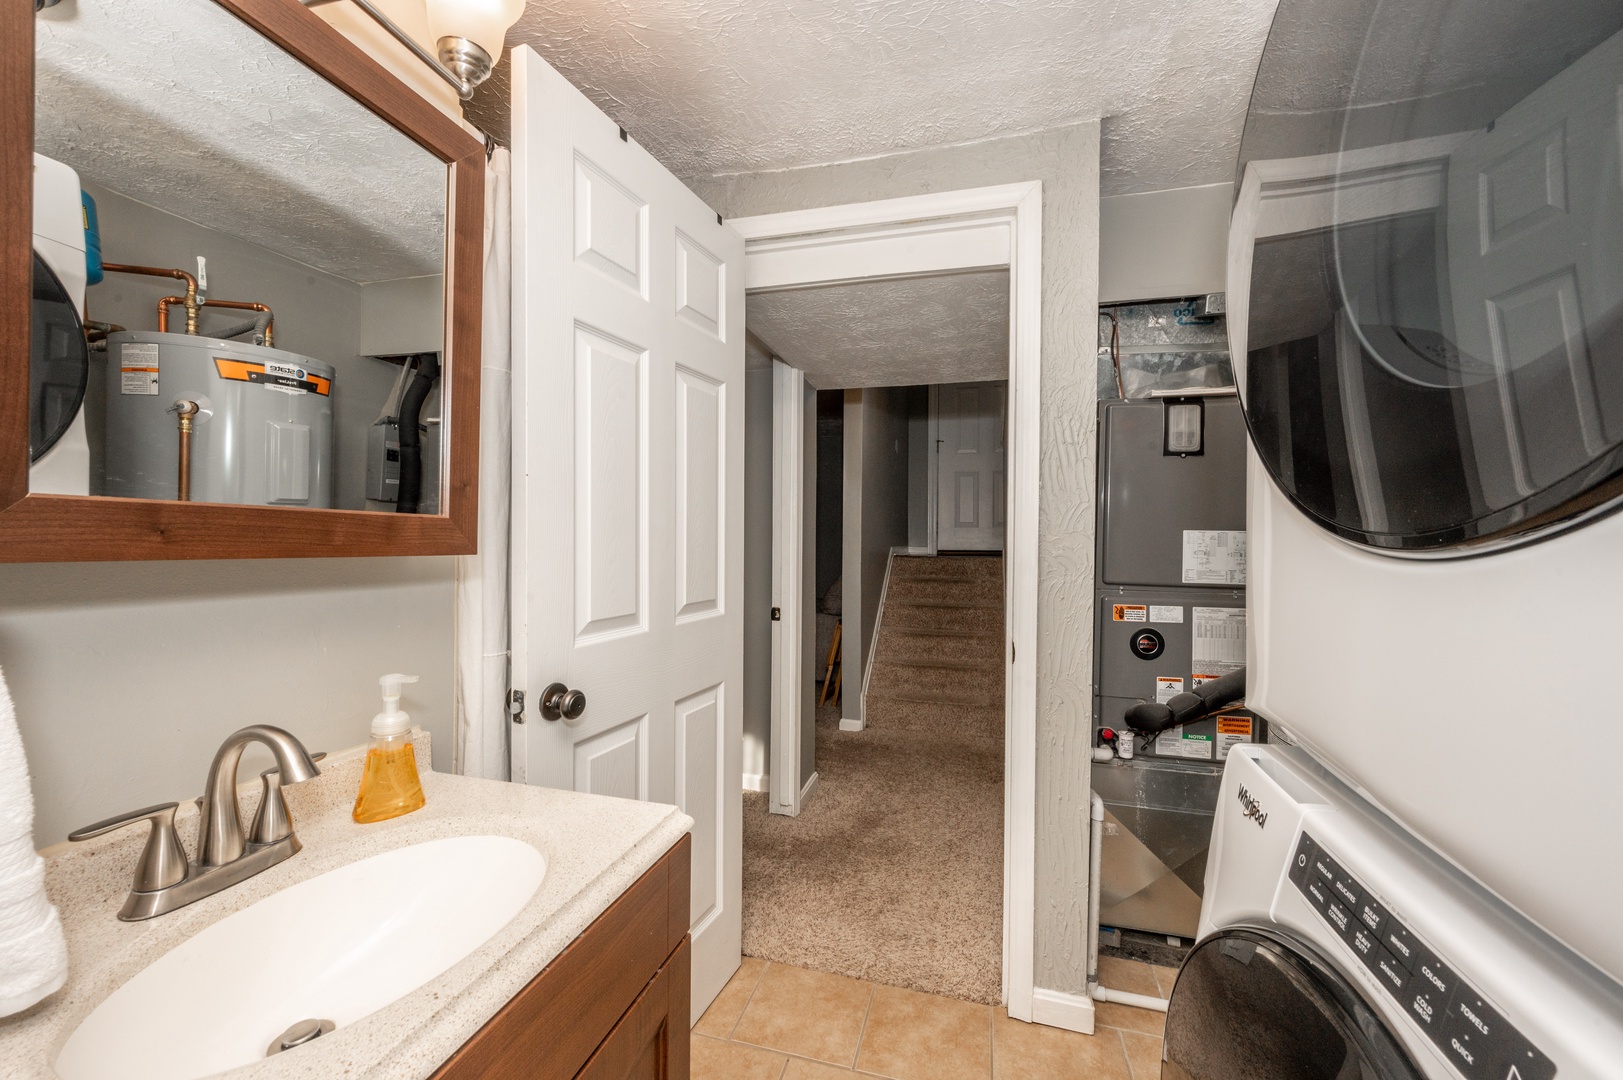 The lower-level bathroom includes a shower & private laundry